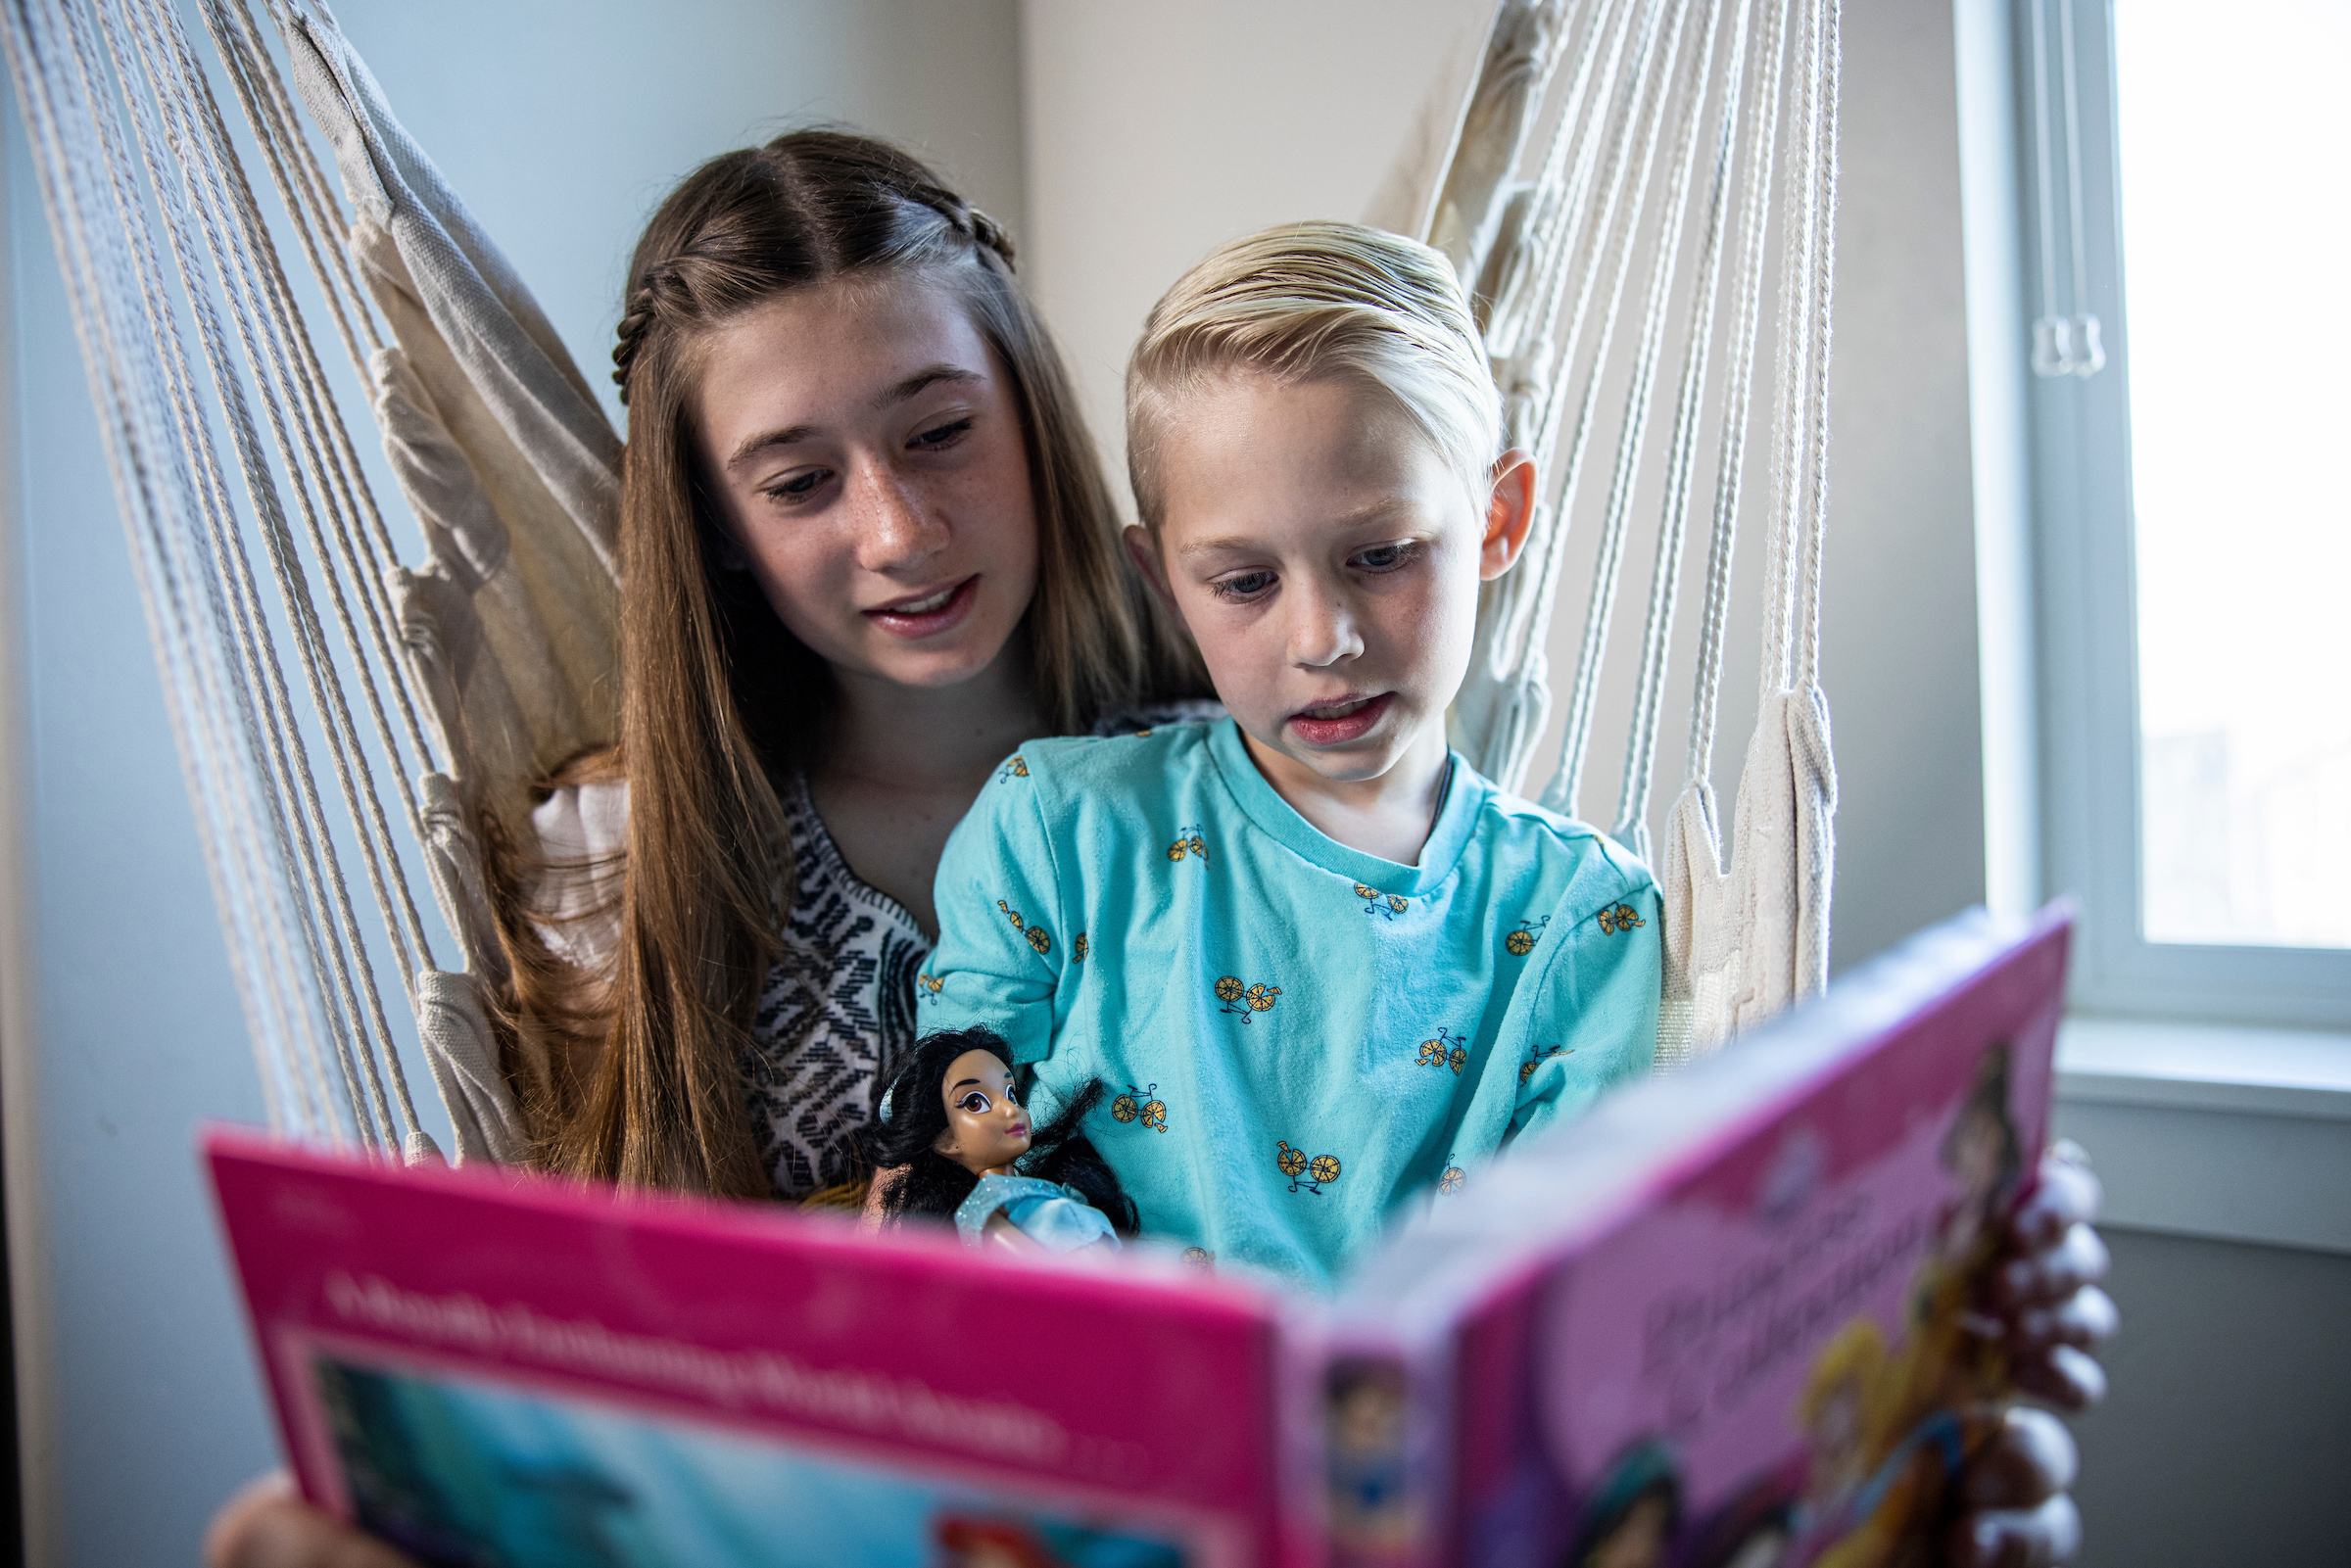 New research finds that children who engaged with princess culture were more likely to hold progressive views about women and subscribe less to attitudes of toxic masculinity. (Nate Edwards/BYU Photo)